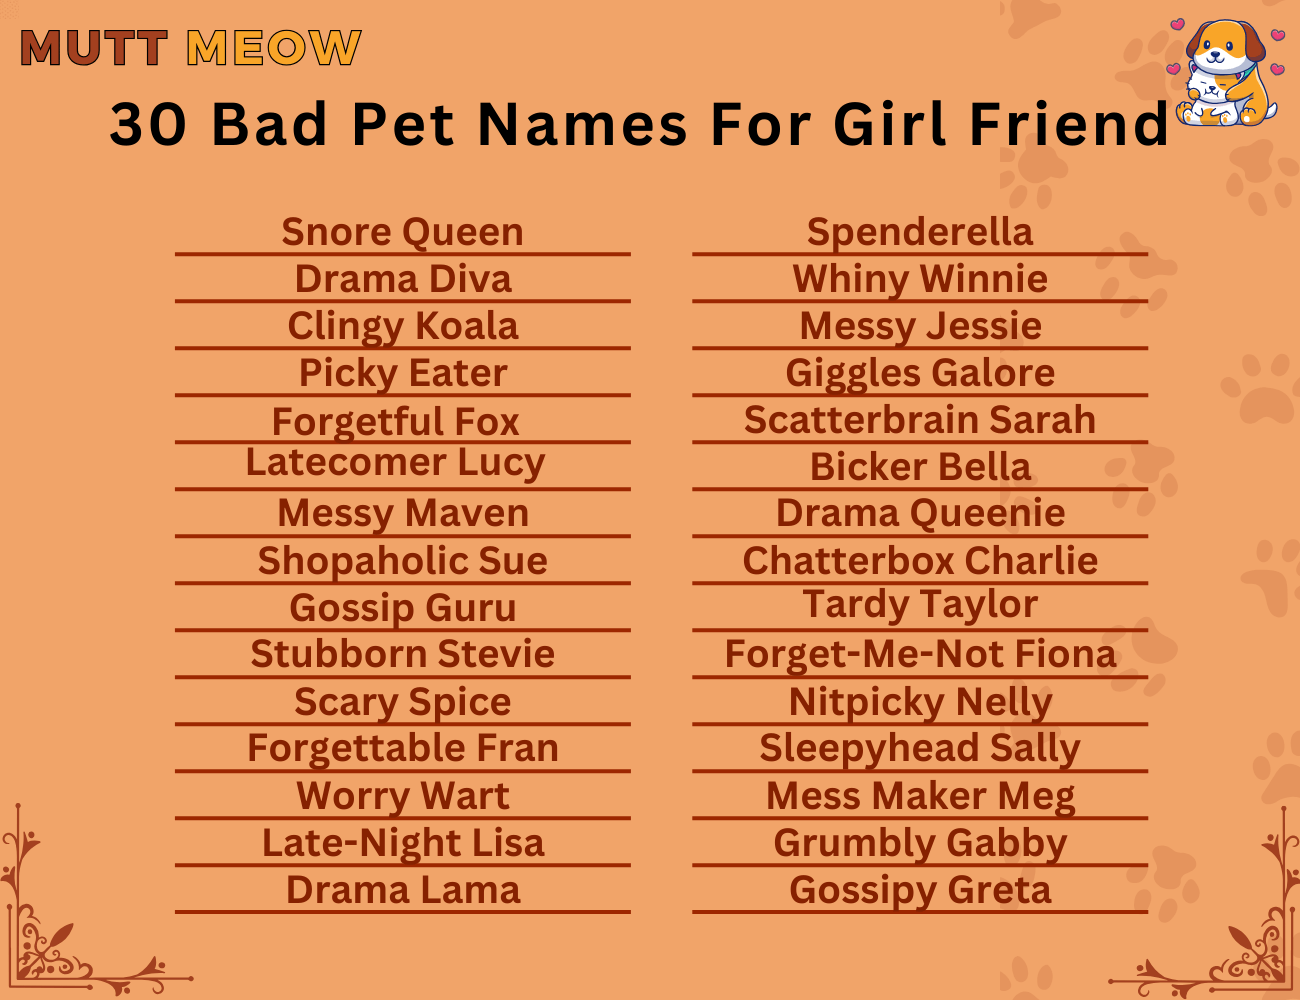 30 Bad Pet Names For Girl friend (1